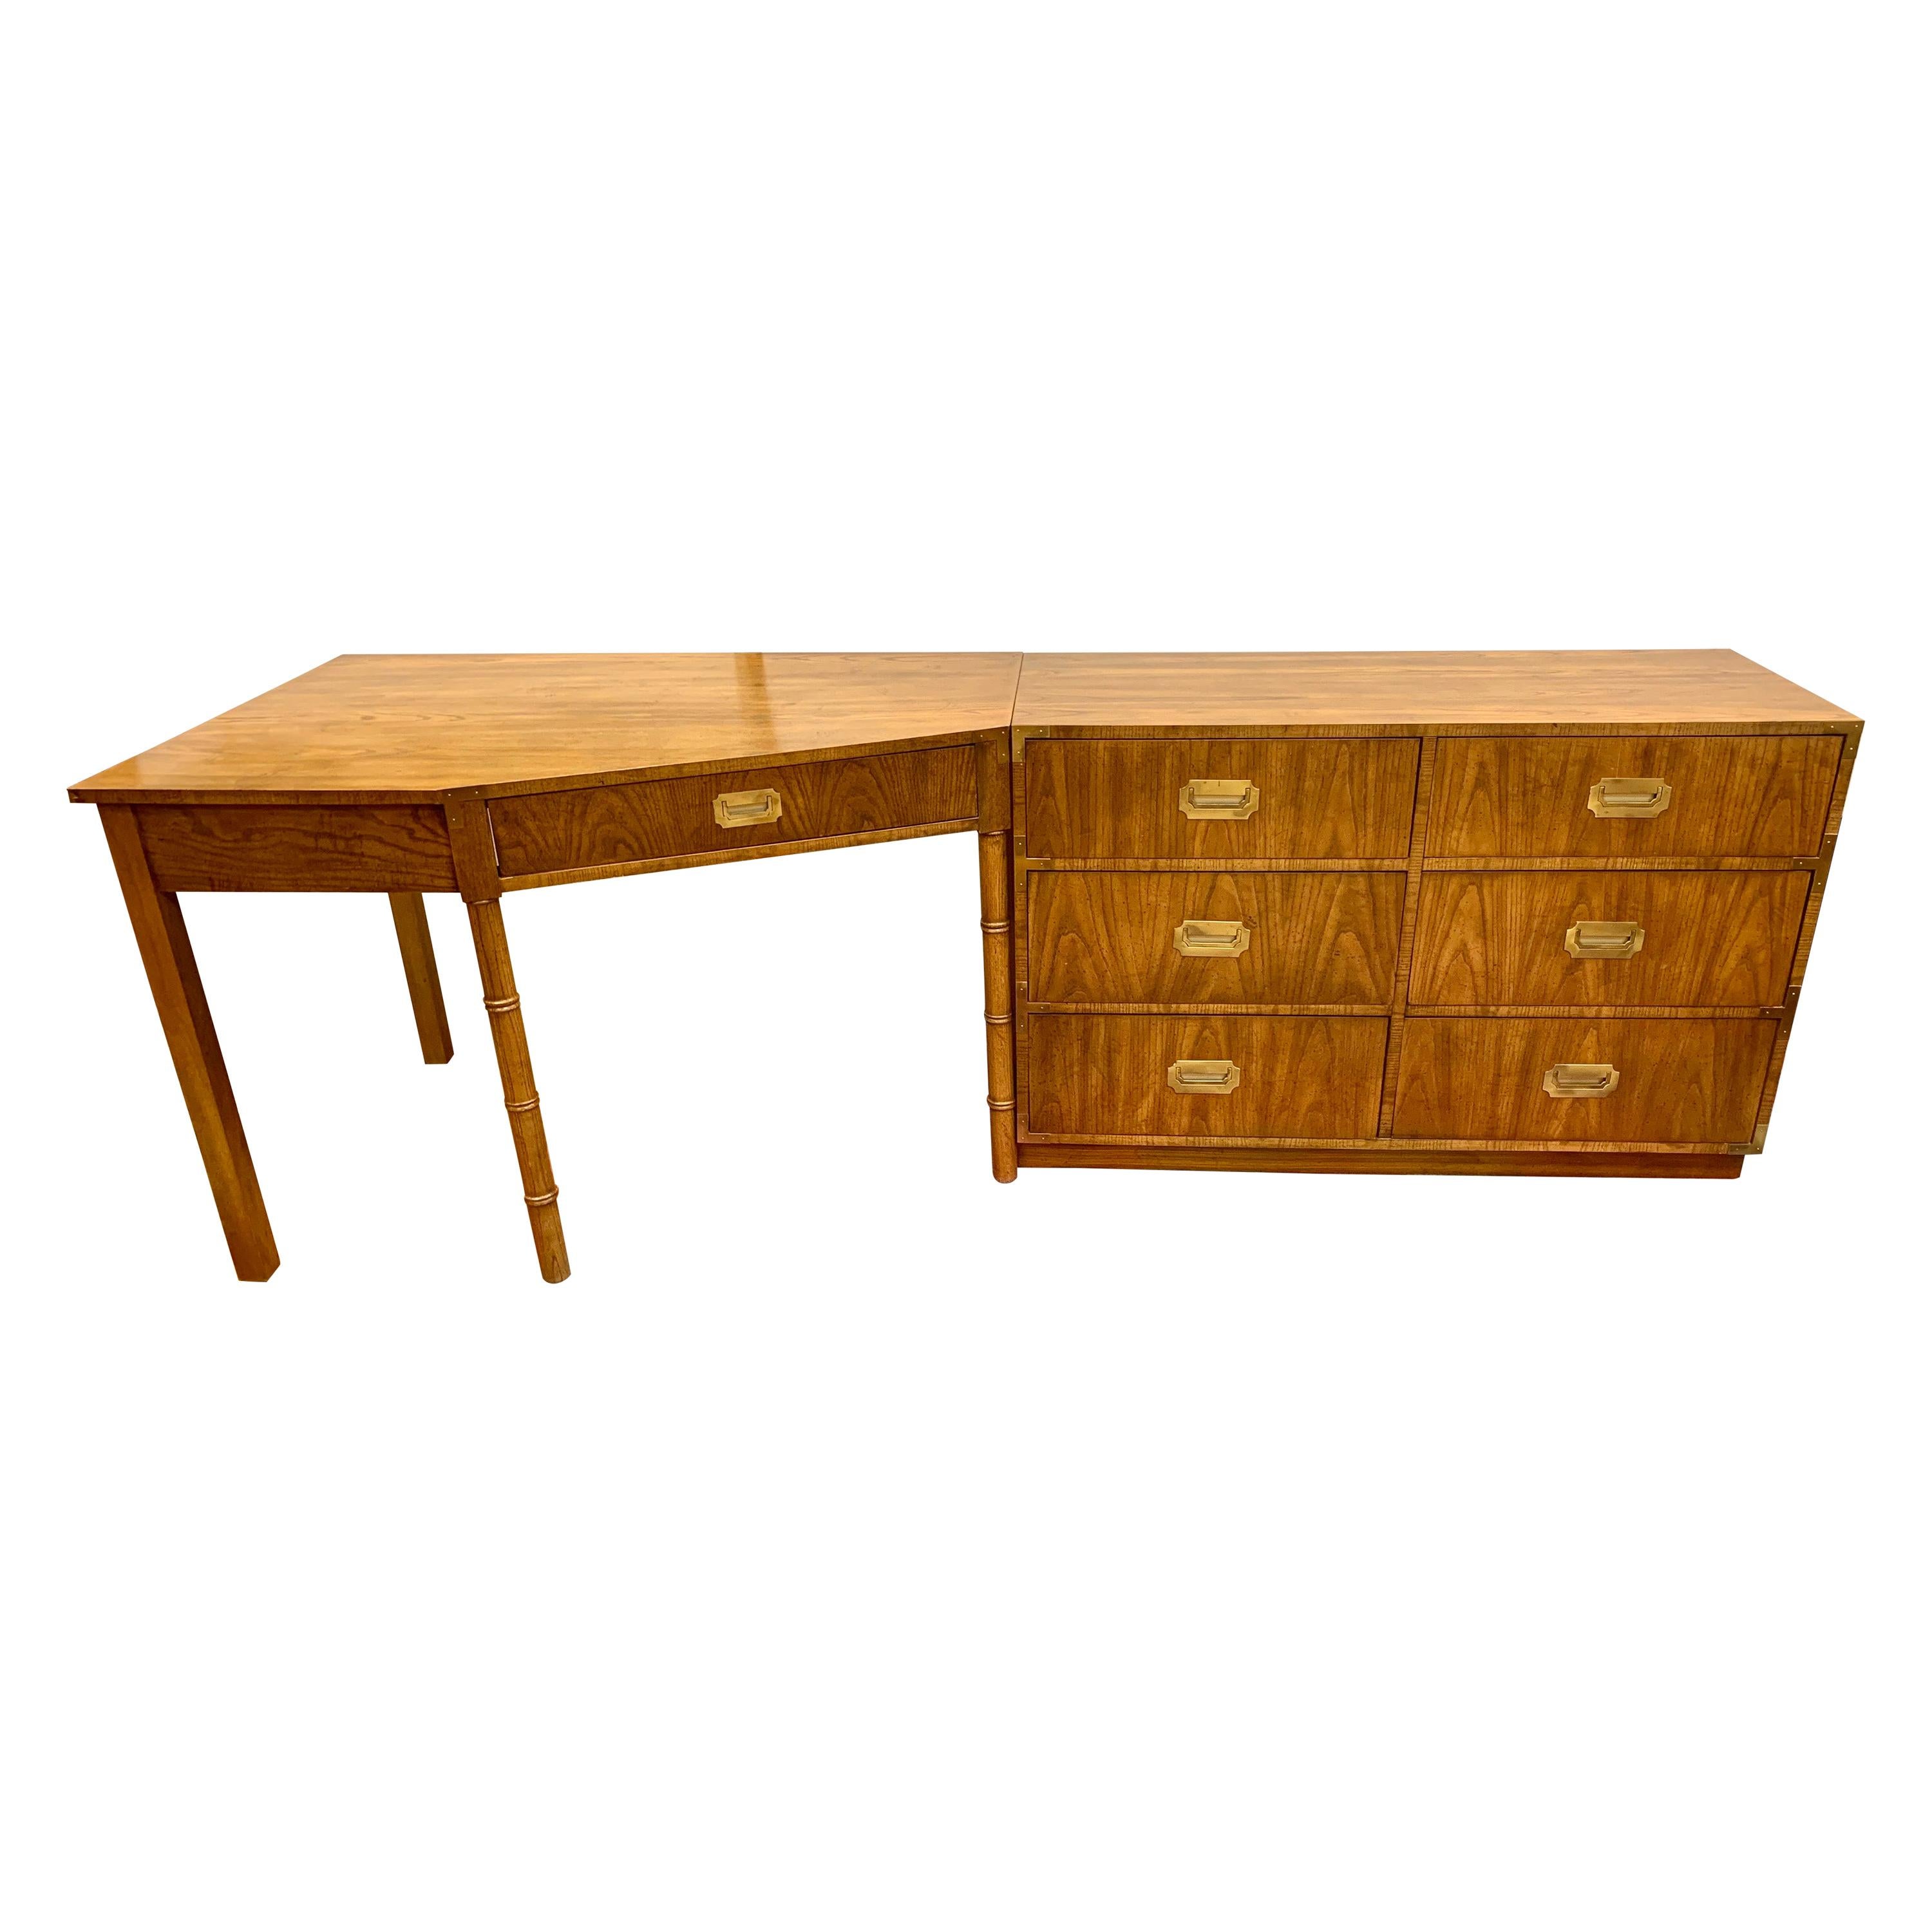 Midcentury Campaign Style Dresser and Faux Bamboo Desk 2-Piece Set